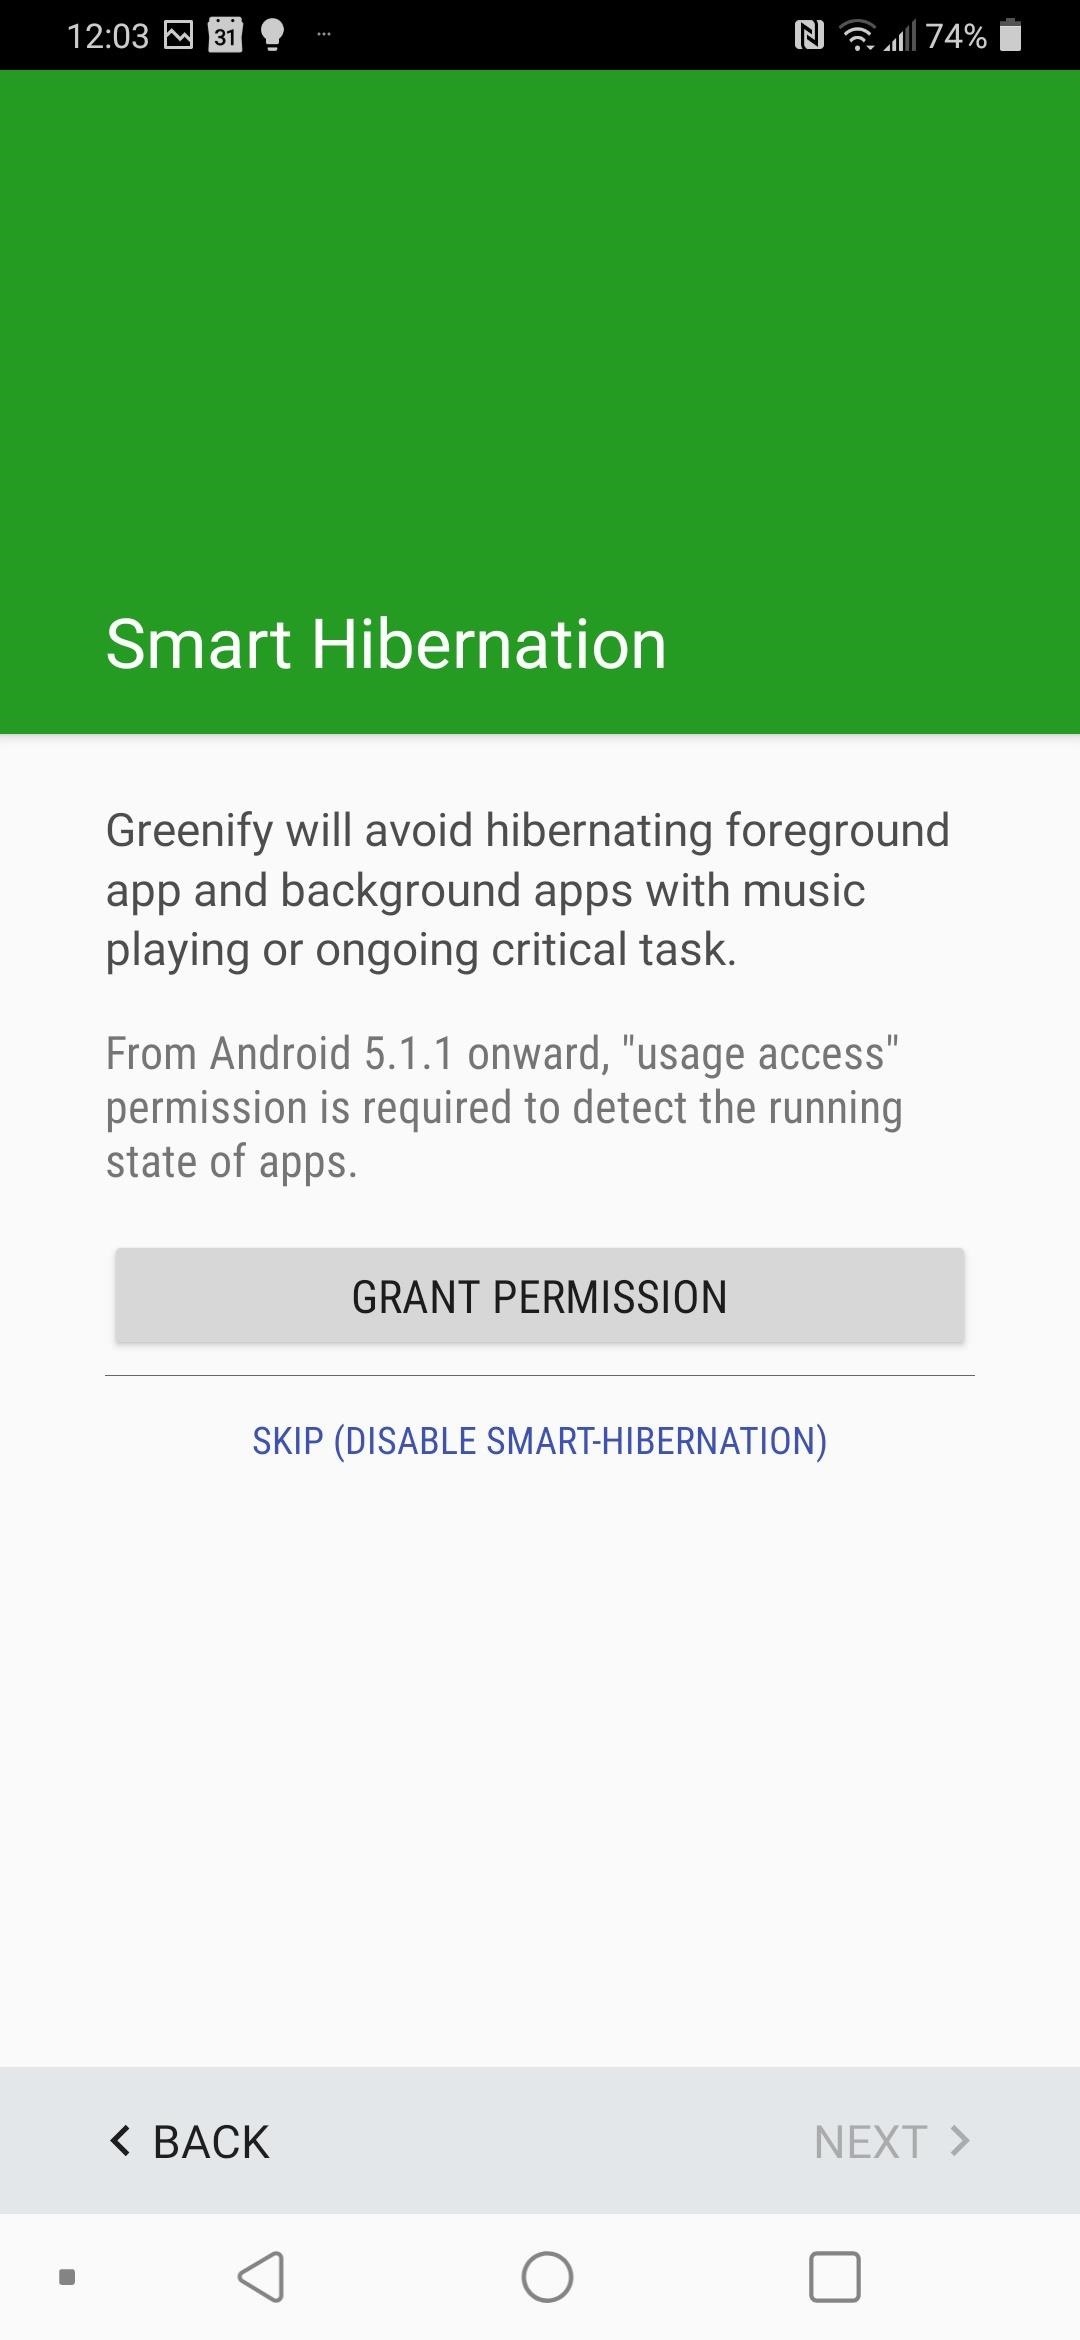 How to Set Up Greenify Without Root & Save Battery Life on Any Android